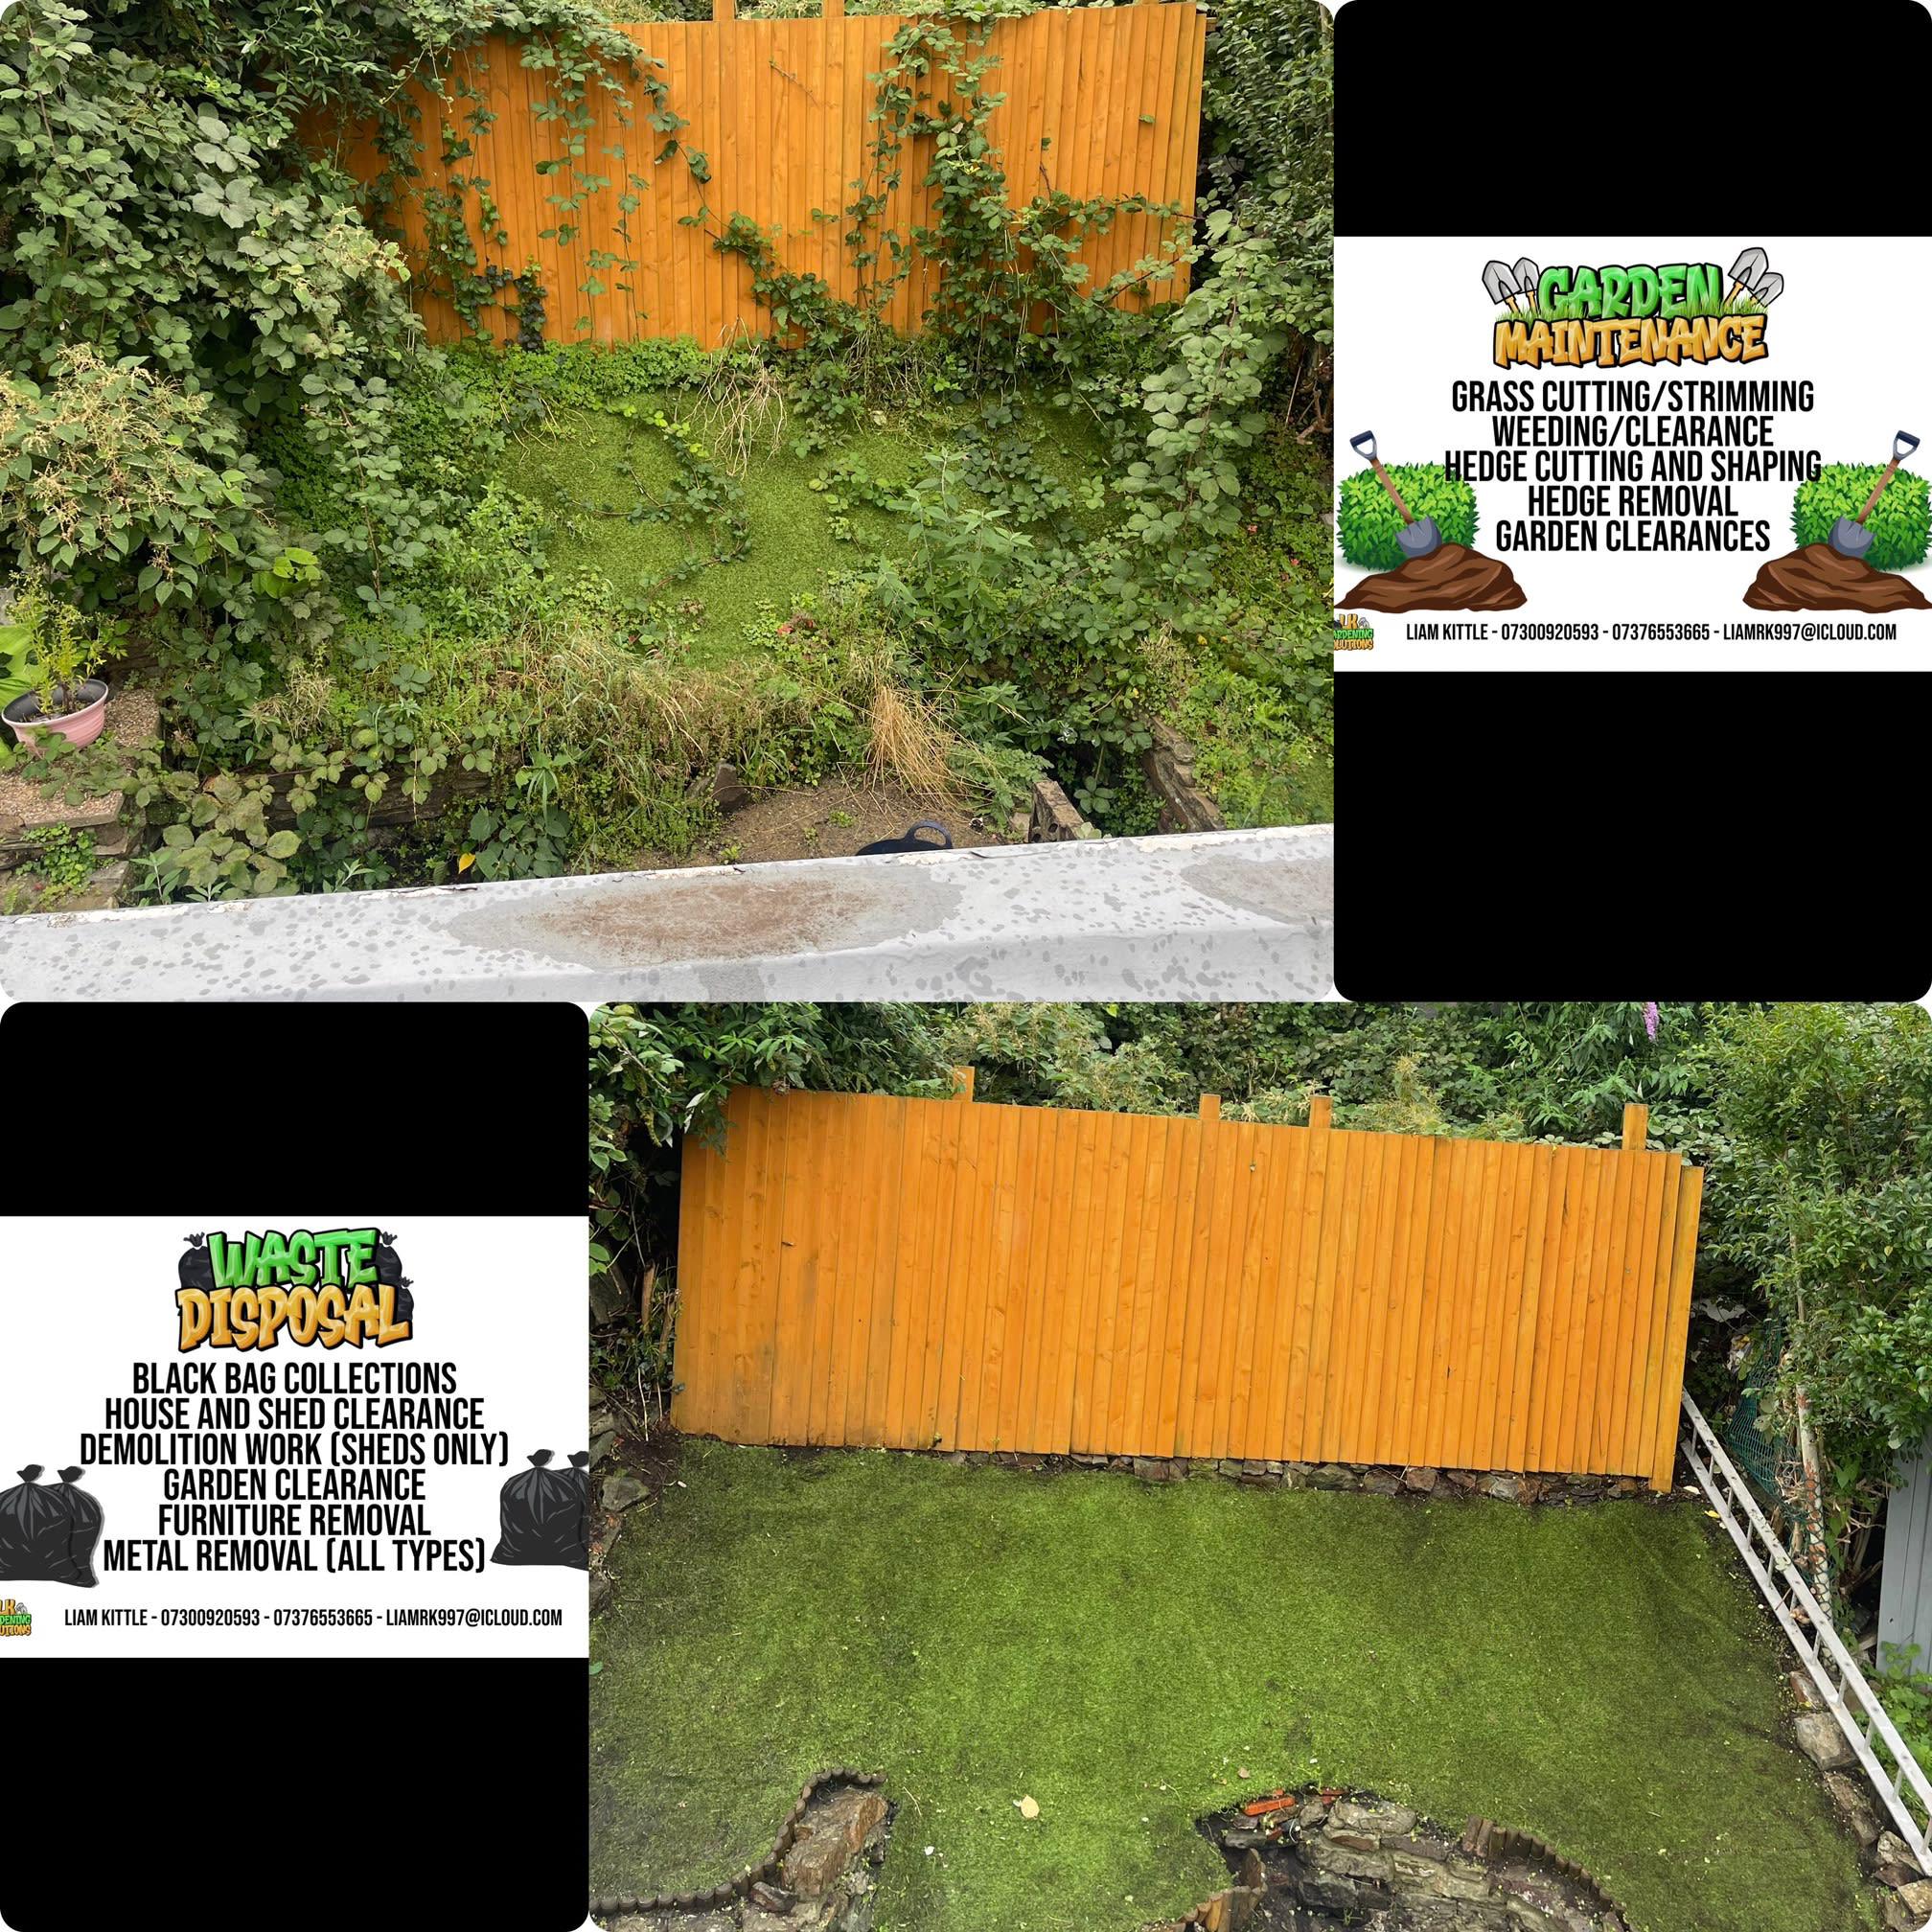 Images LK Gardening Solutions and Waste Disposal